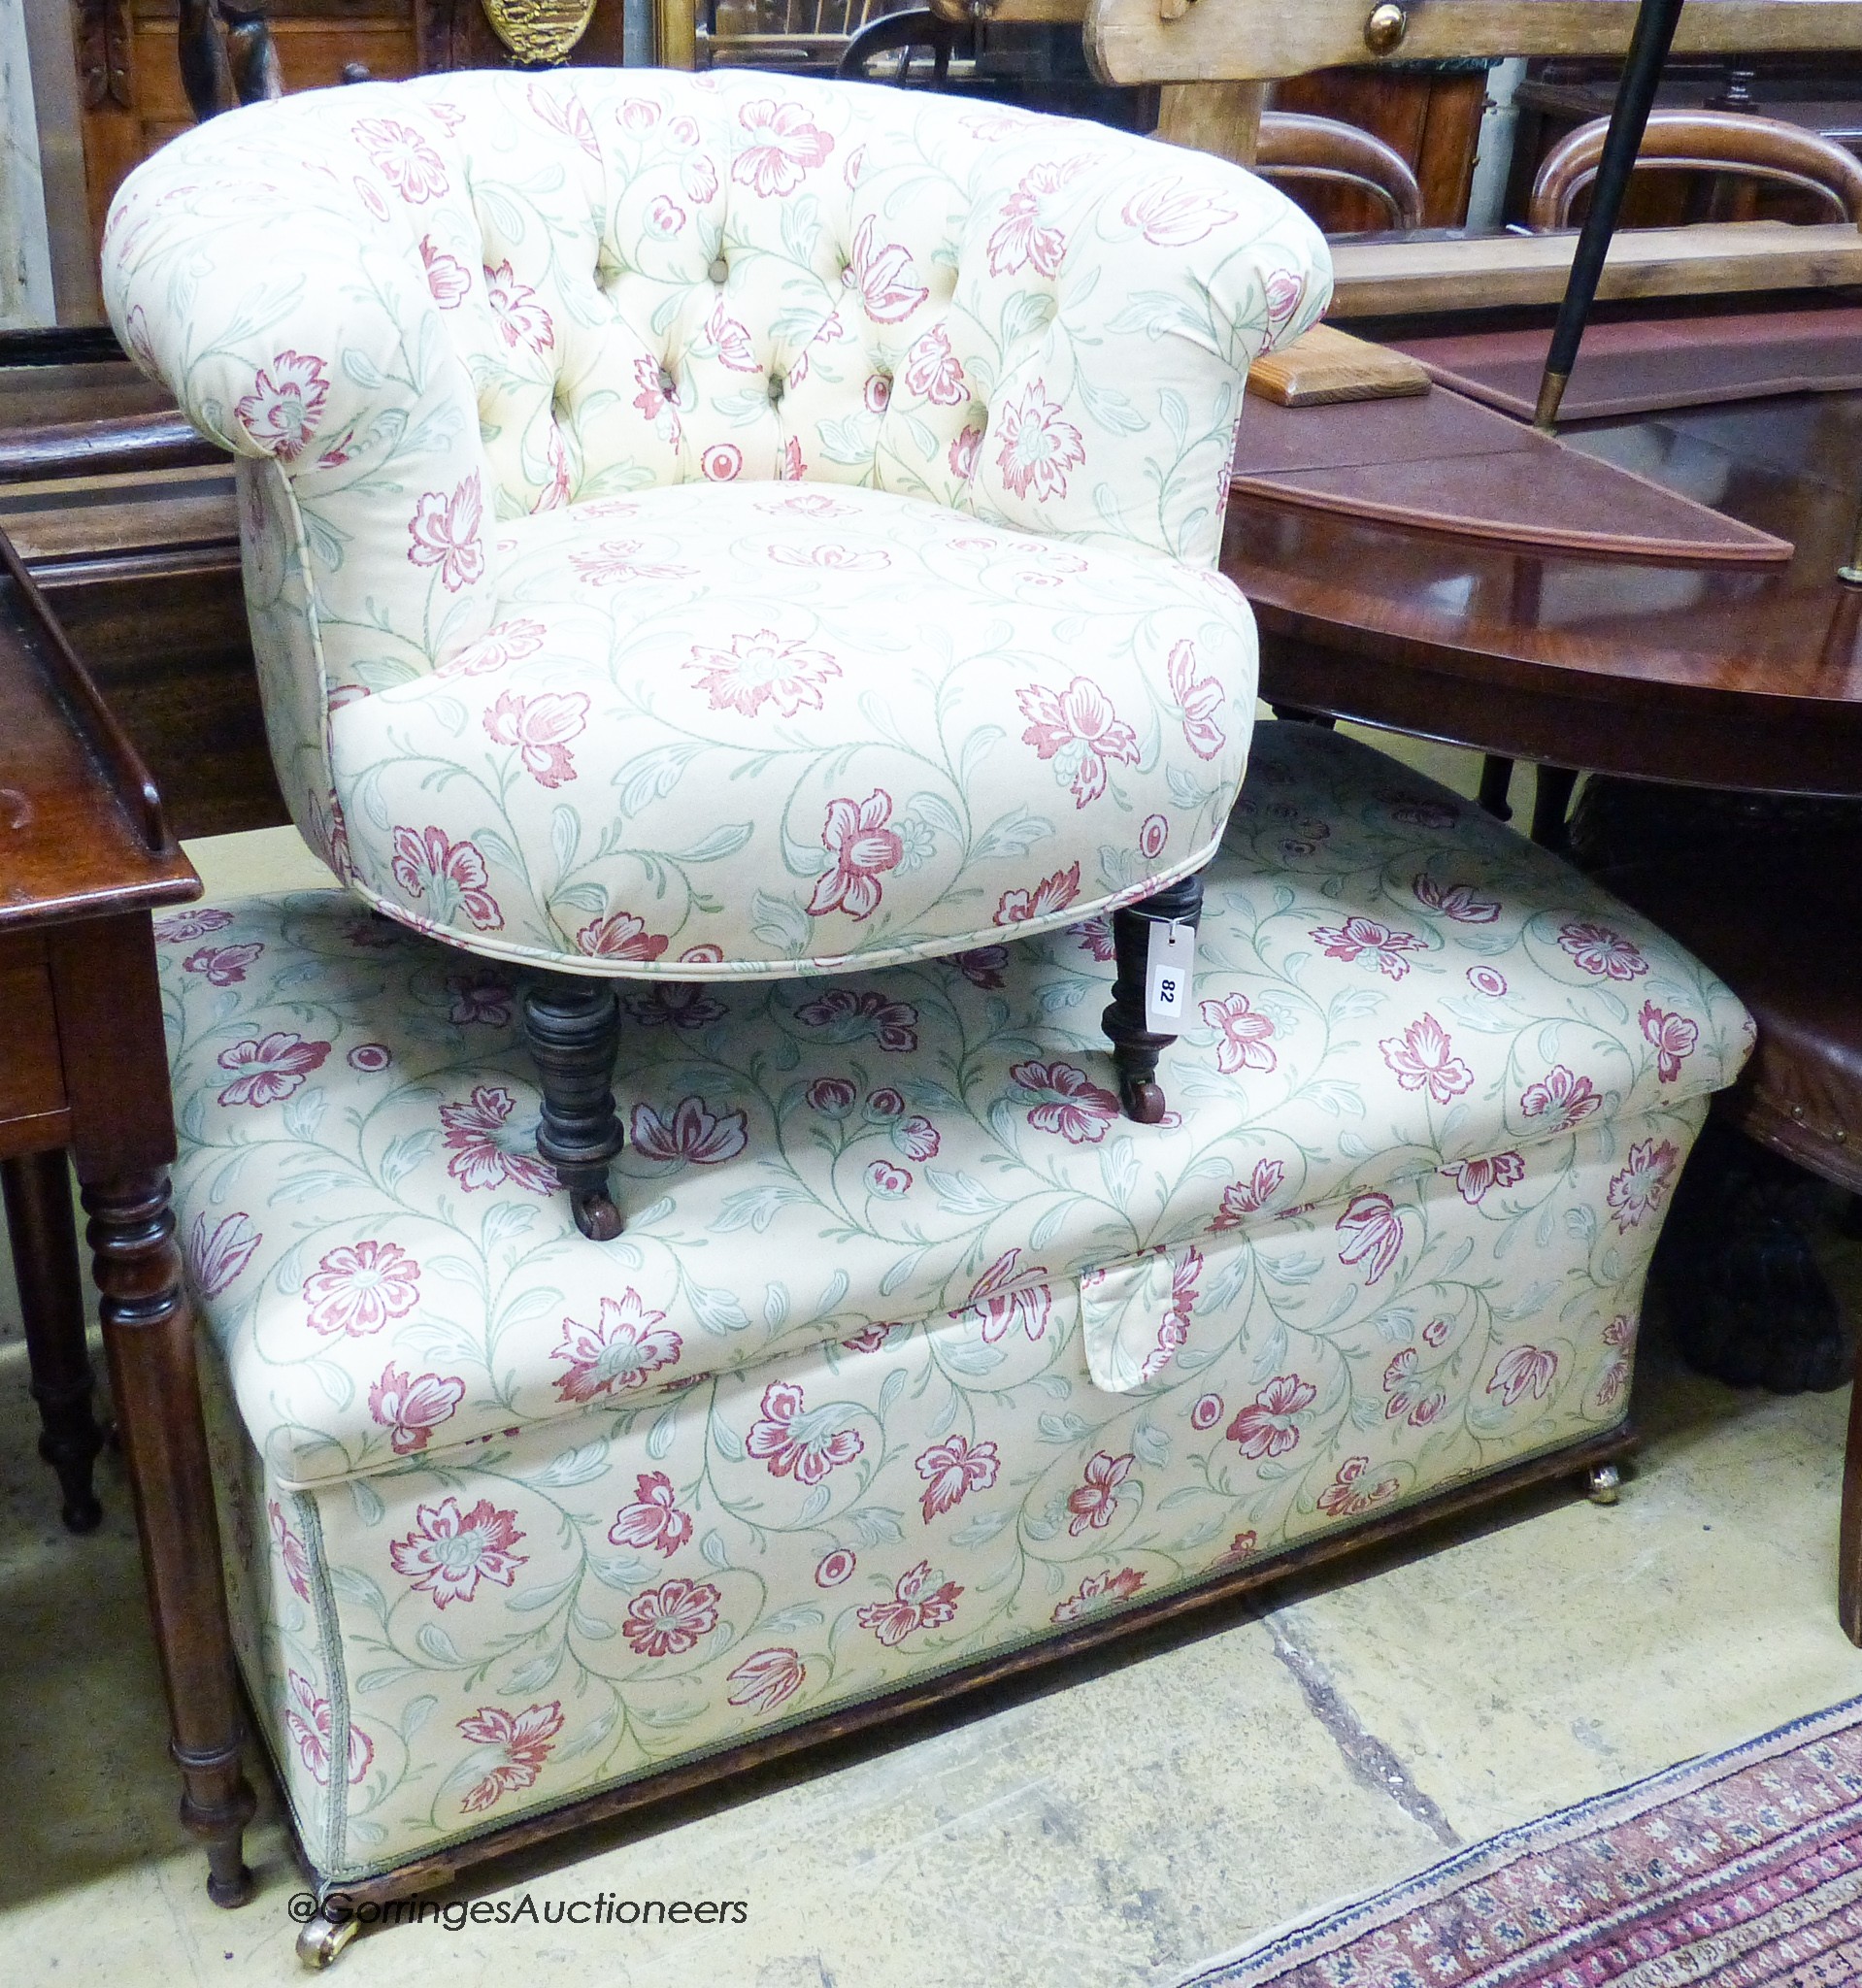 A late Victorian upholstered ottoman, length 112cm, depth 58cm, height 48cm together with a buttoned framed tub chair upholstered in the same fabric